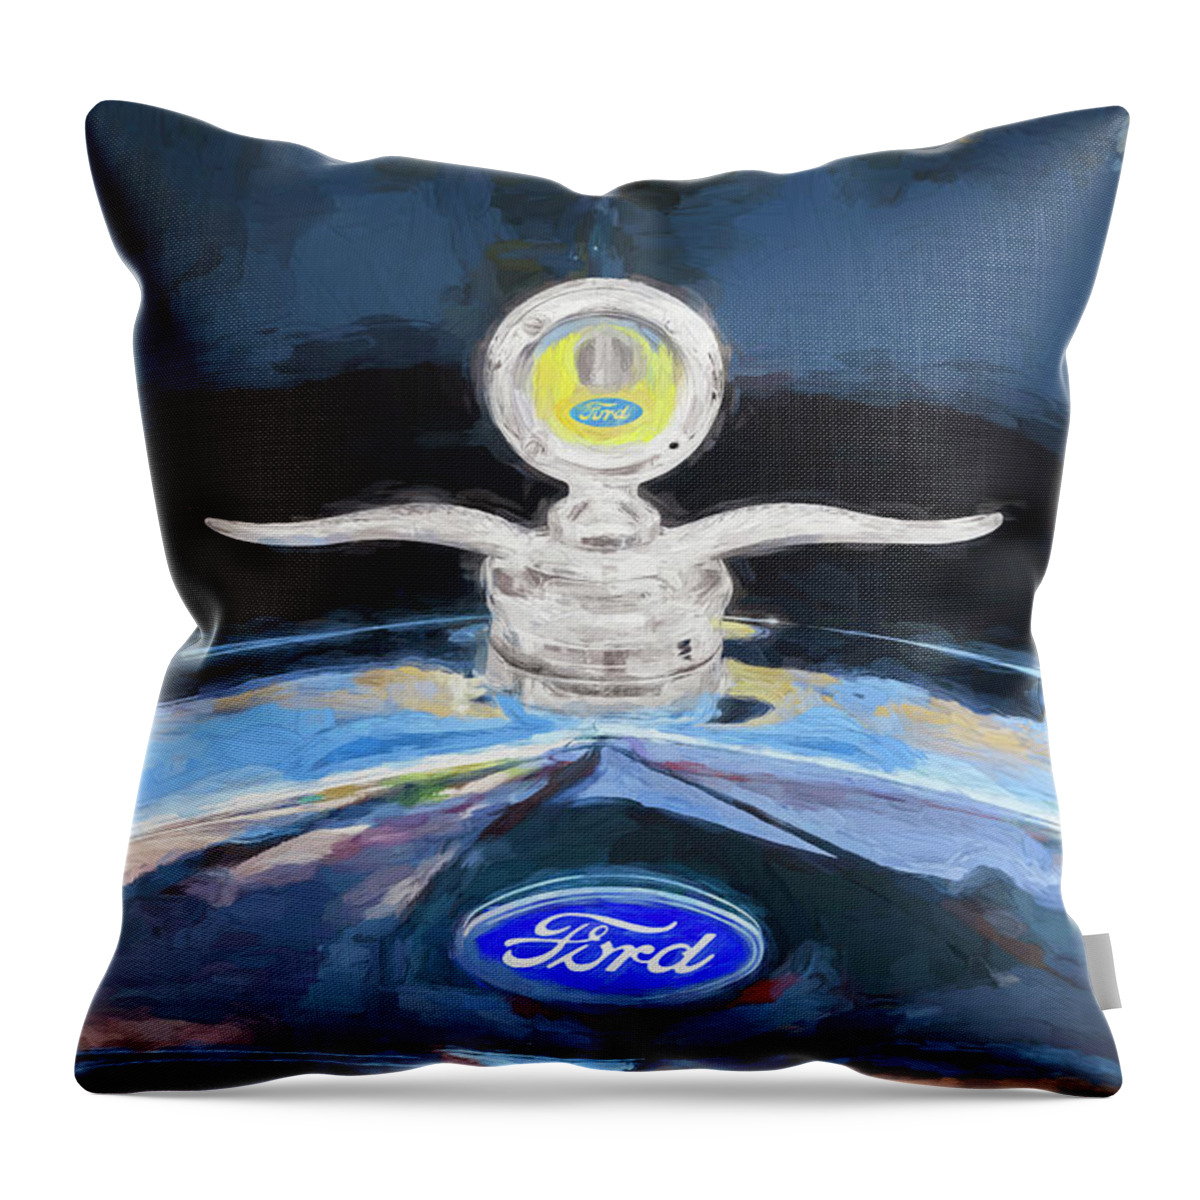 1929 Ford Model A Throw Pillow featuring the photograph 1929 Ford Model A Hood Ornament Painted by Rich Franco